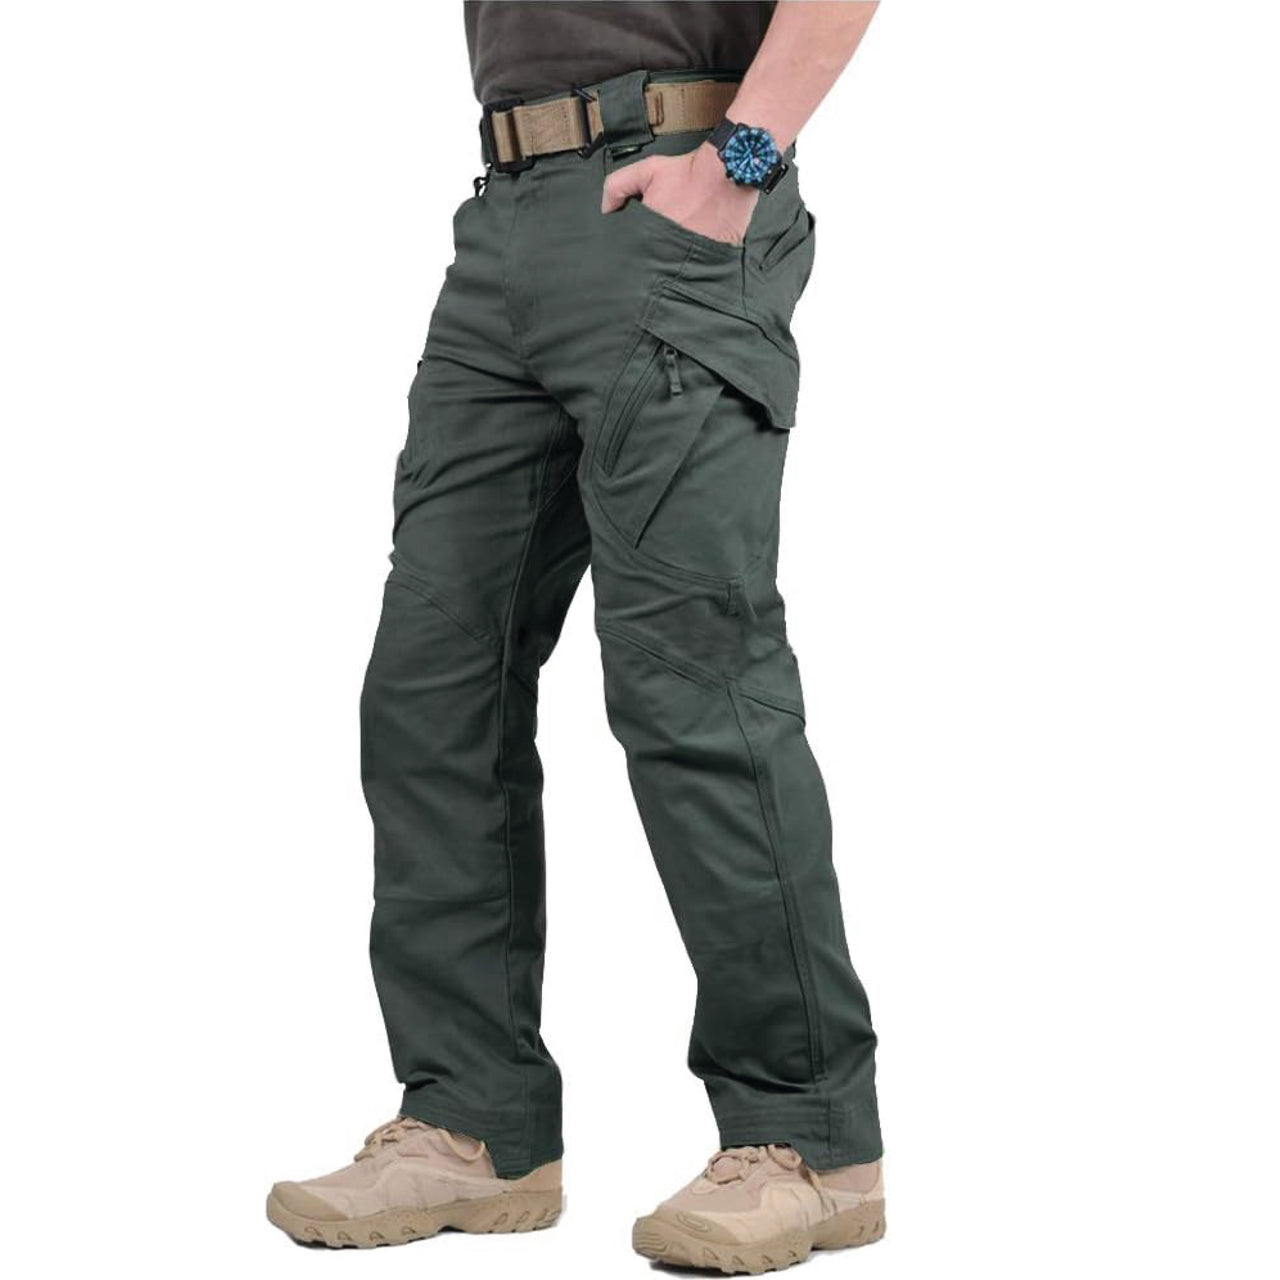 Tactical Cargo Pants Ripstop Coyote MILCOT MILITARY - Army Supply Store  Military